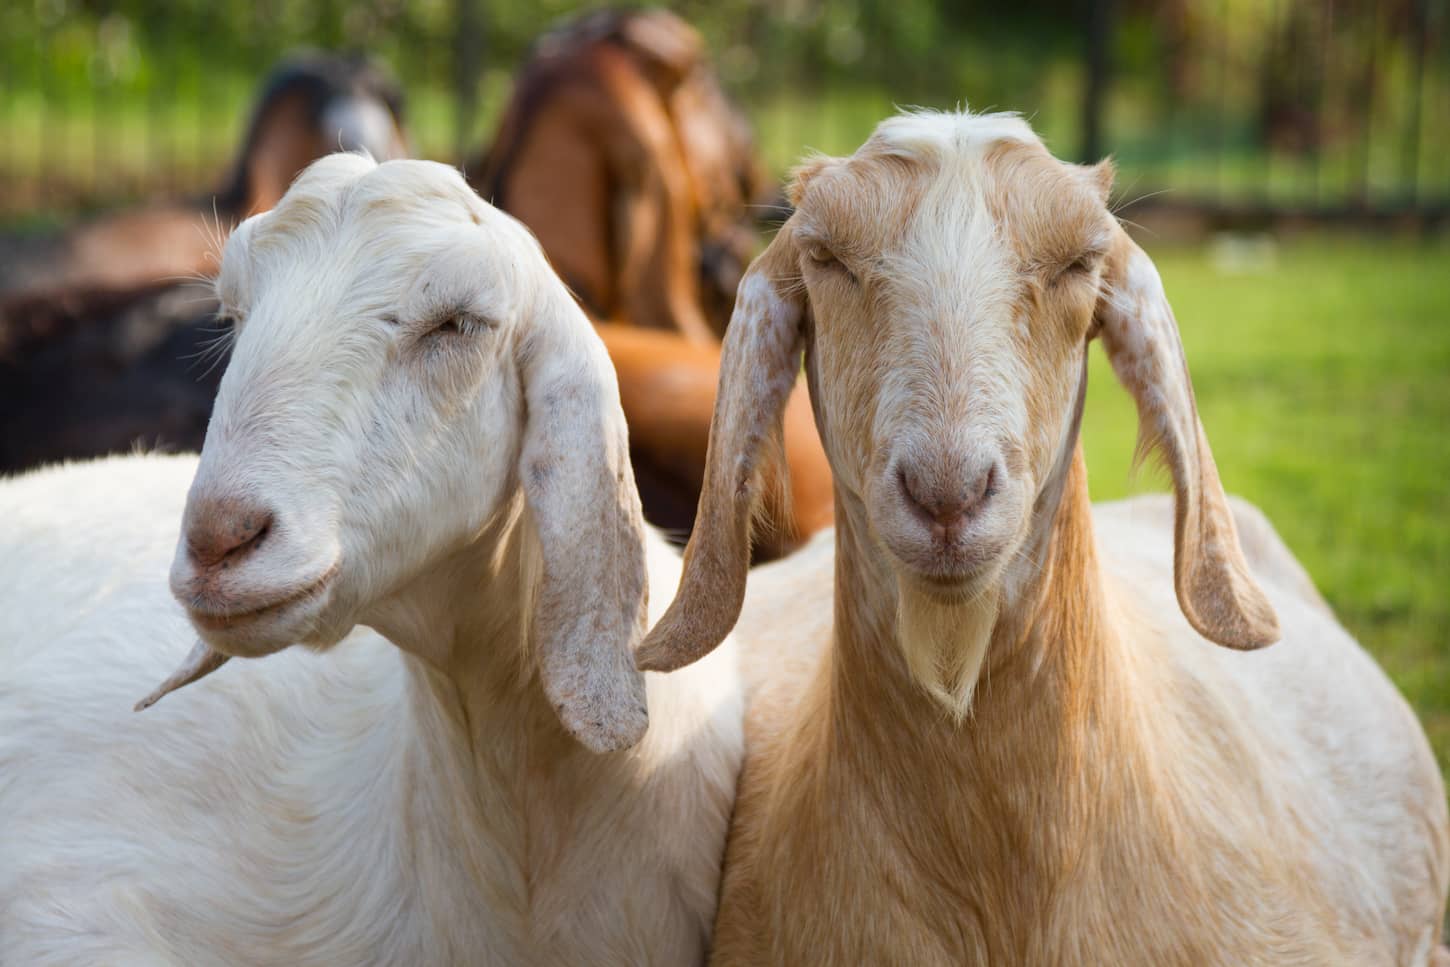 An image of two goats on the ranch.